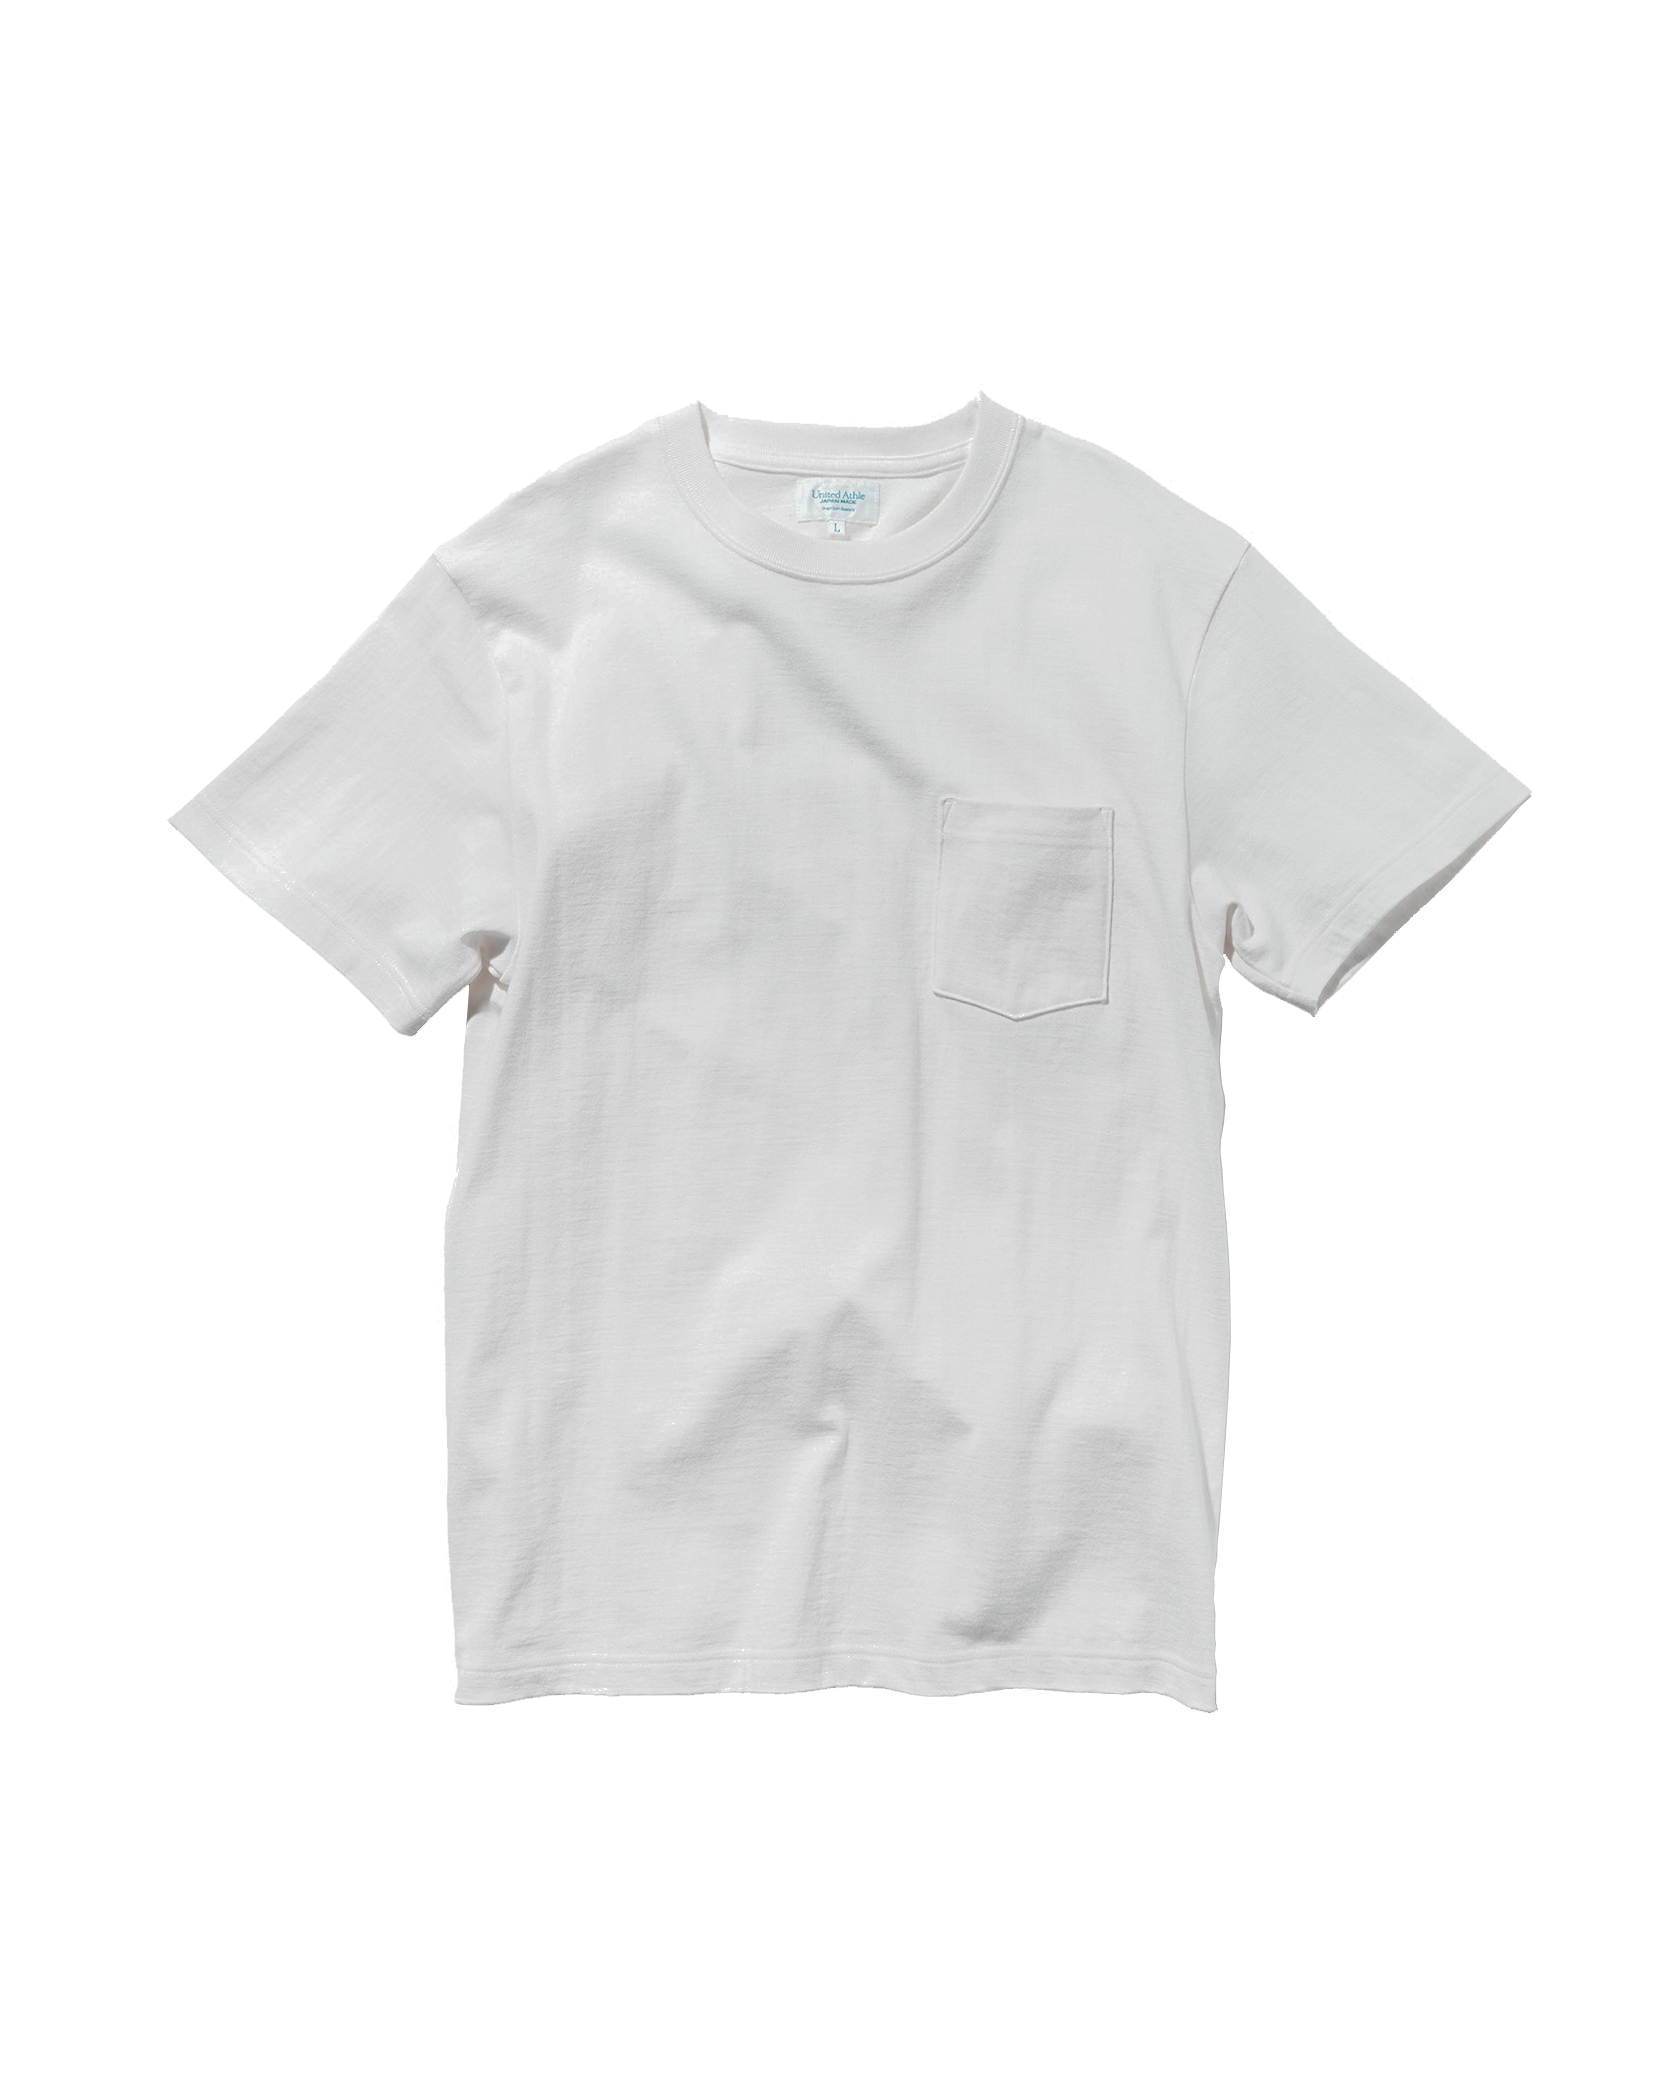 80002 - Japan Made - Standard Fit T-shirt (with pocket) - White x 1